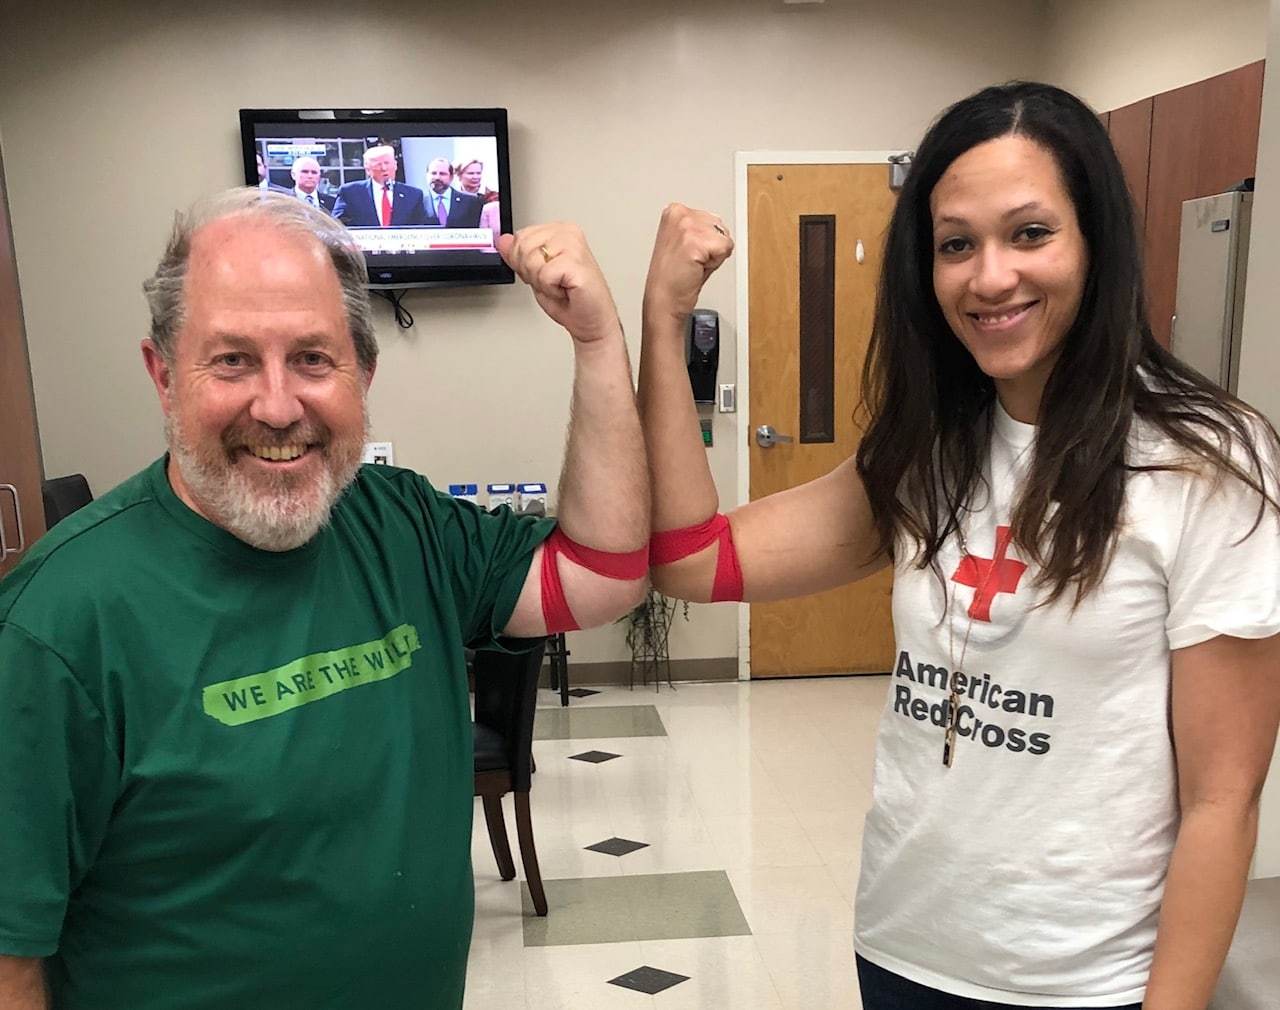 The American Red Cross is in desperate need of blood donations!